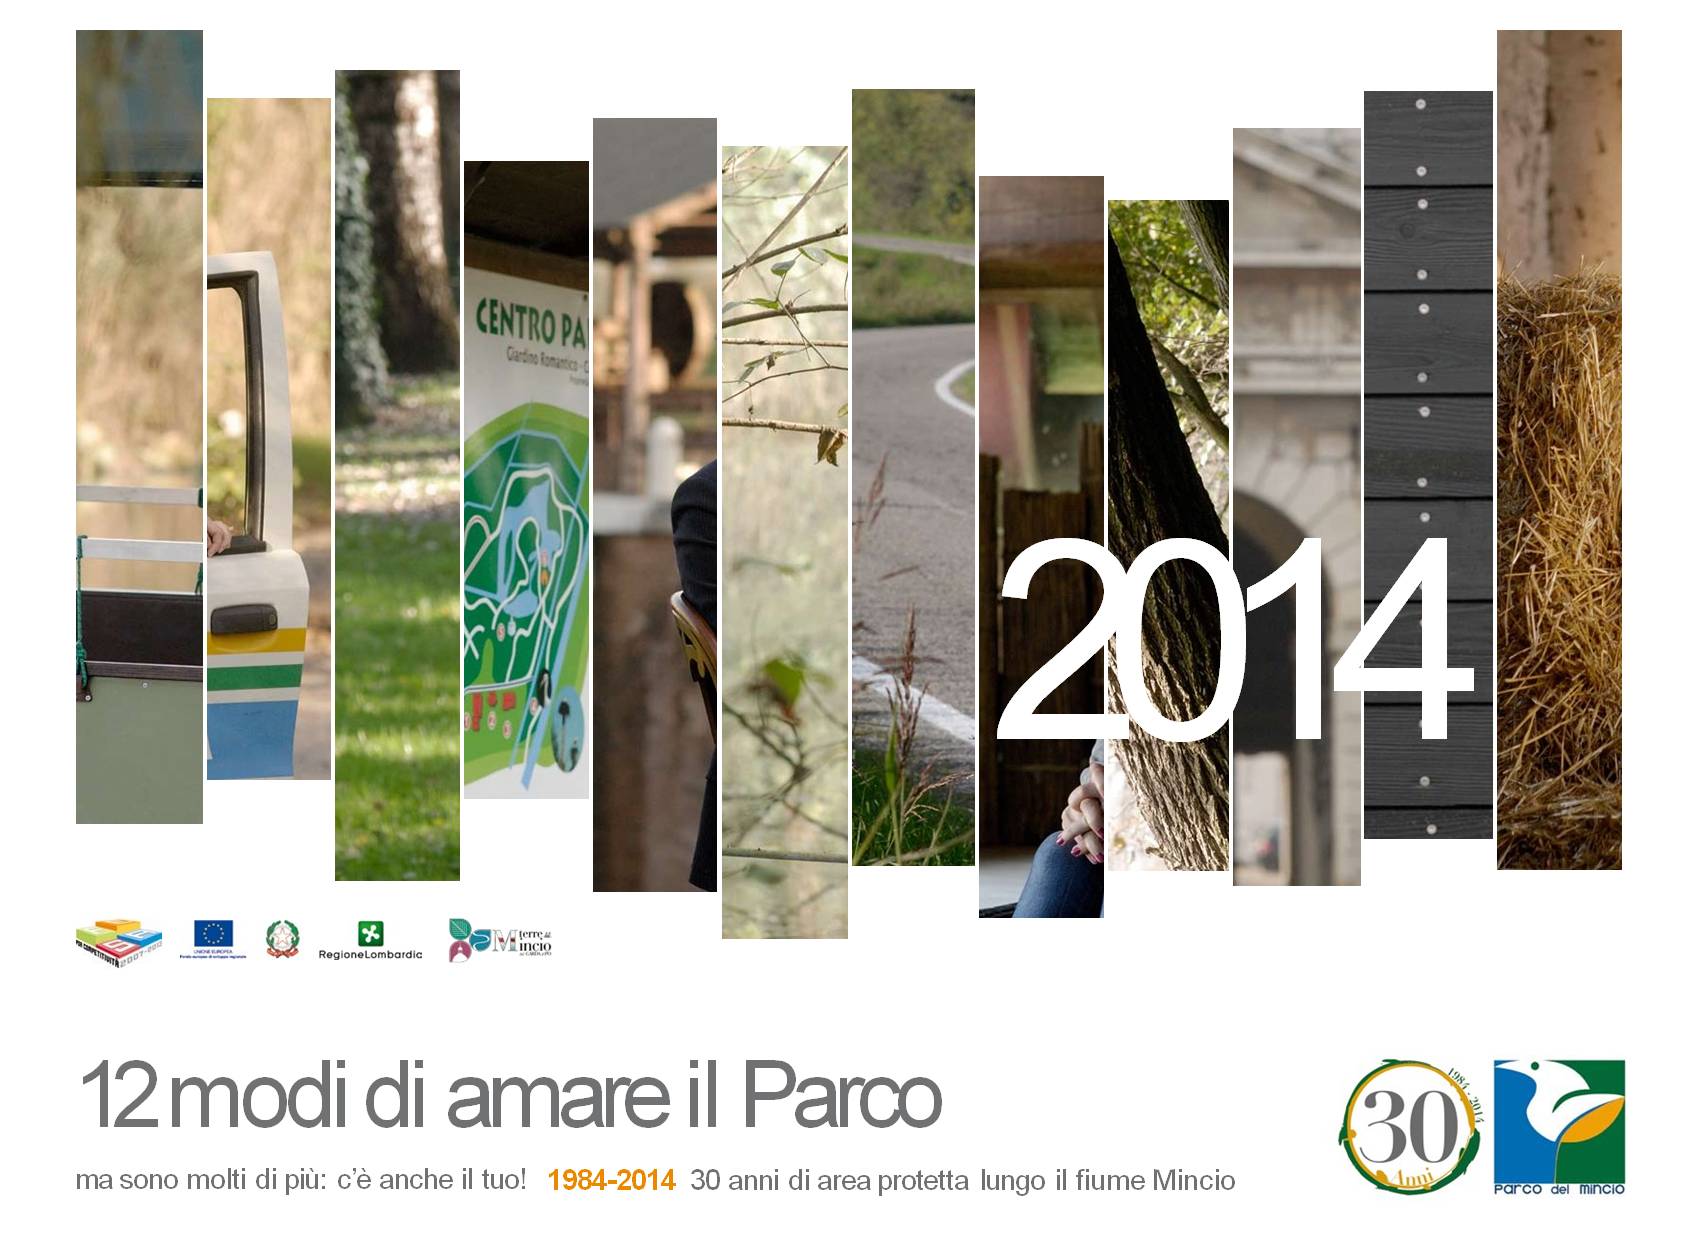 The calendar 2014 of the Park Authority: 30 years of the Park told by 12 faces